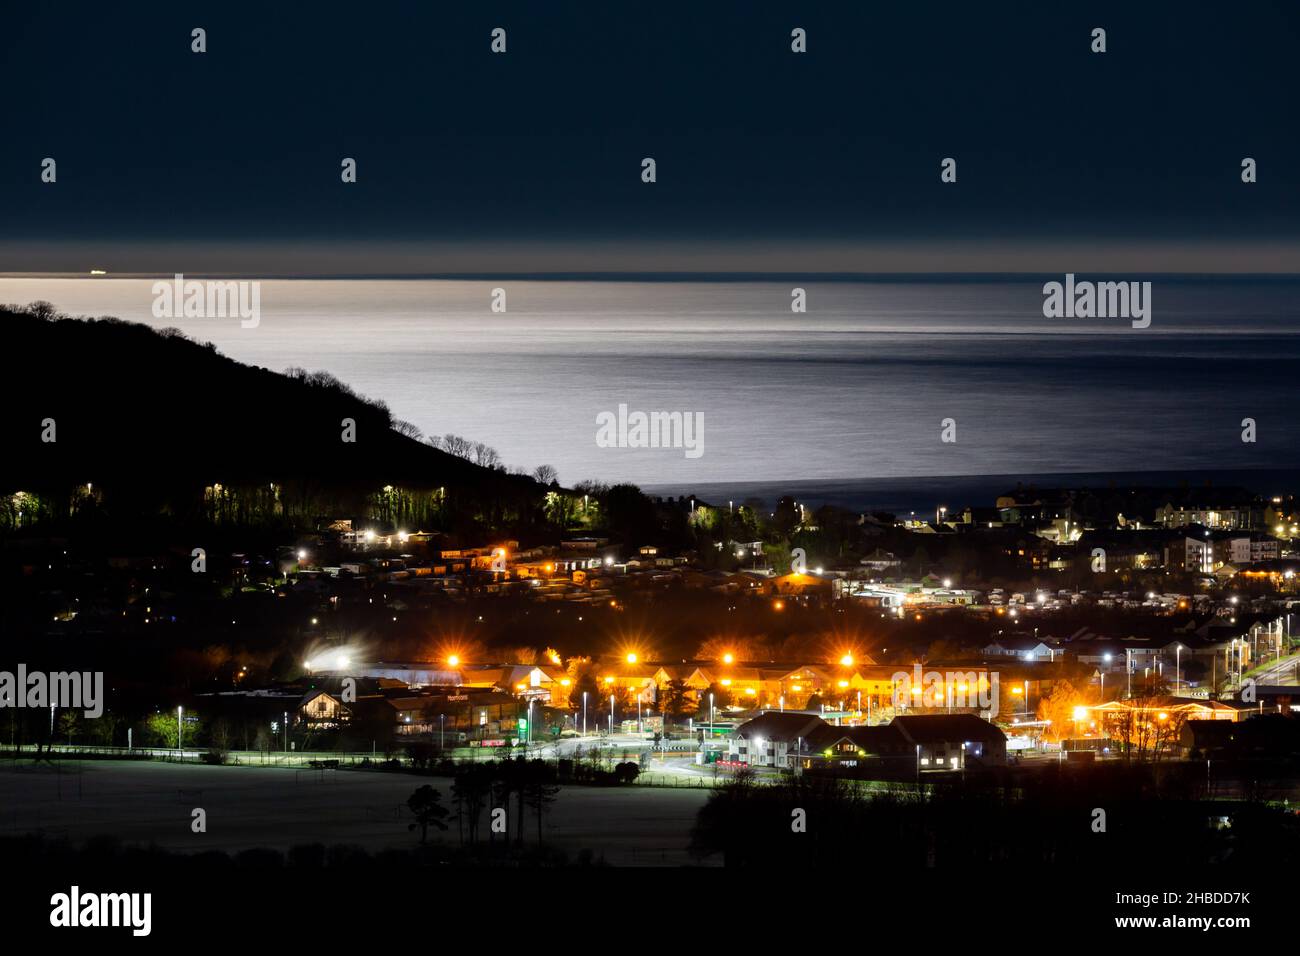 Aberystwyth, Ceredigion, Wales, UK. 19th December 2021  UK Weather: Cold frosty morning in Aberystwyth, as the reflecting moonlight shines over the bay on the west coast. © Ian Jones/Alamy Live News Stock Photo